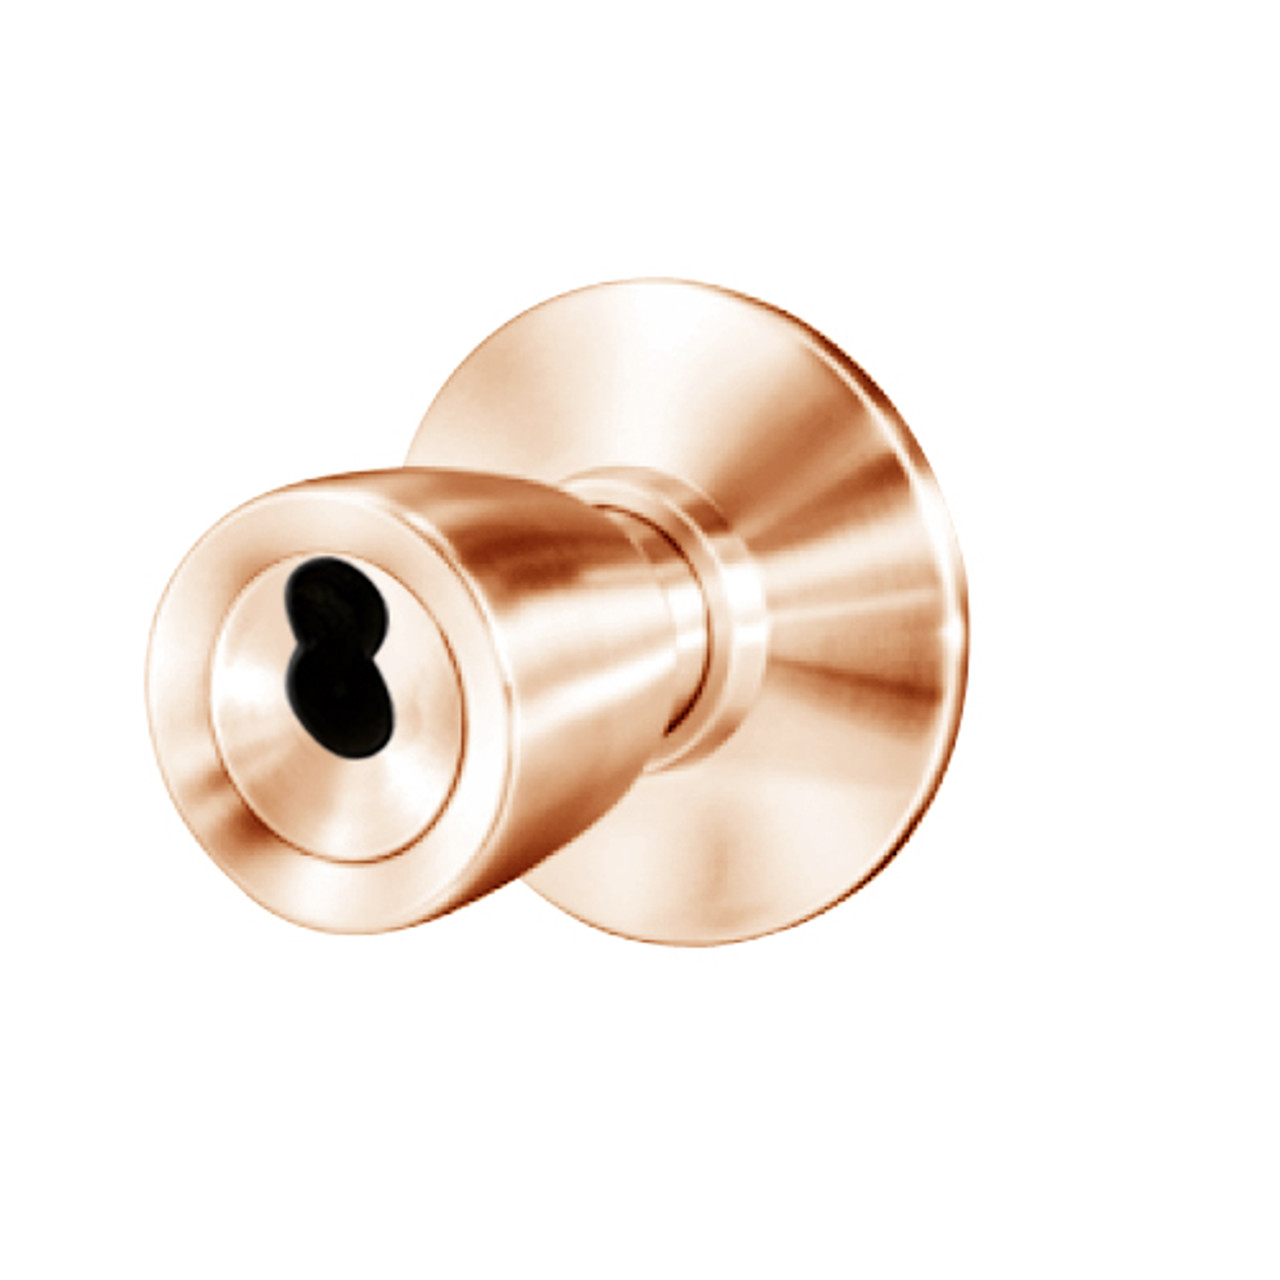 8K57YD6DS3611 Best 8K Series Exit Heavy Duty Cylindrical Knob Locks with Tulip Style in Bright Bronze